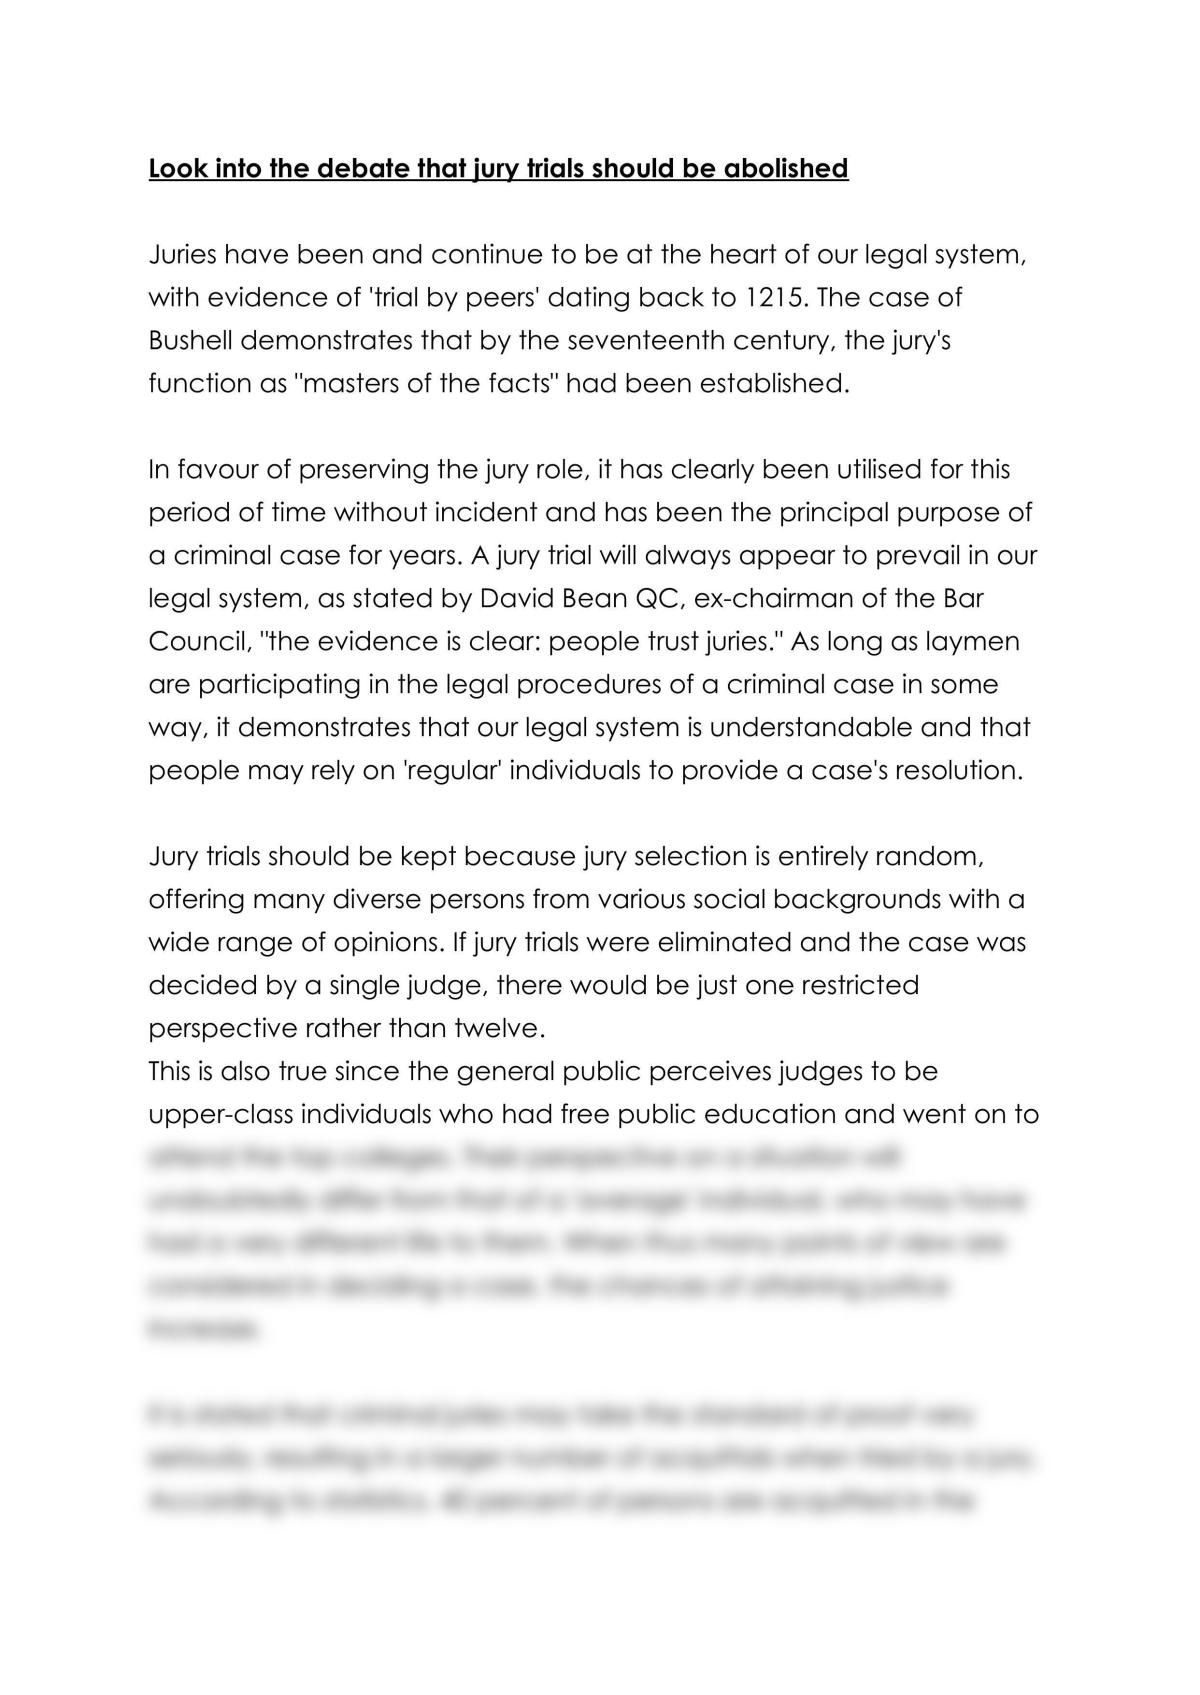 Should Jury Trial be Abolished? - Page 1